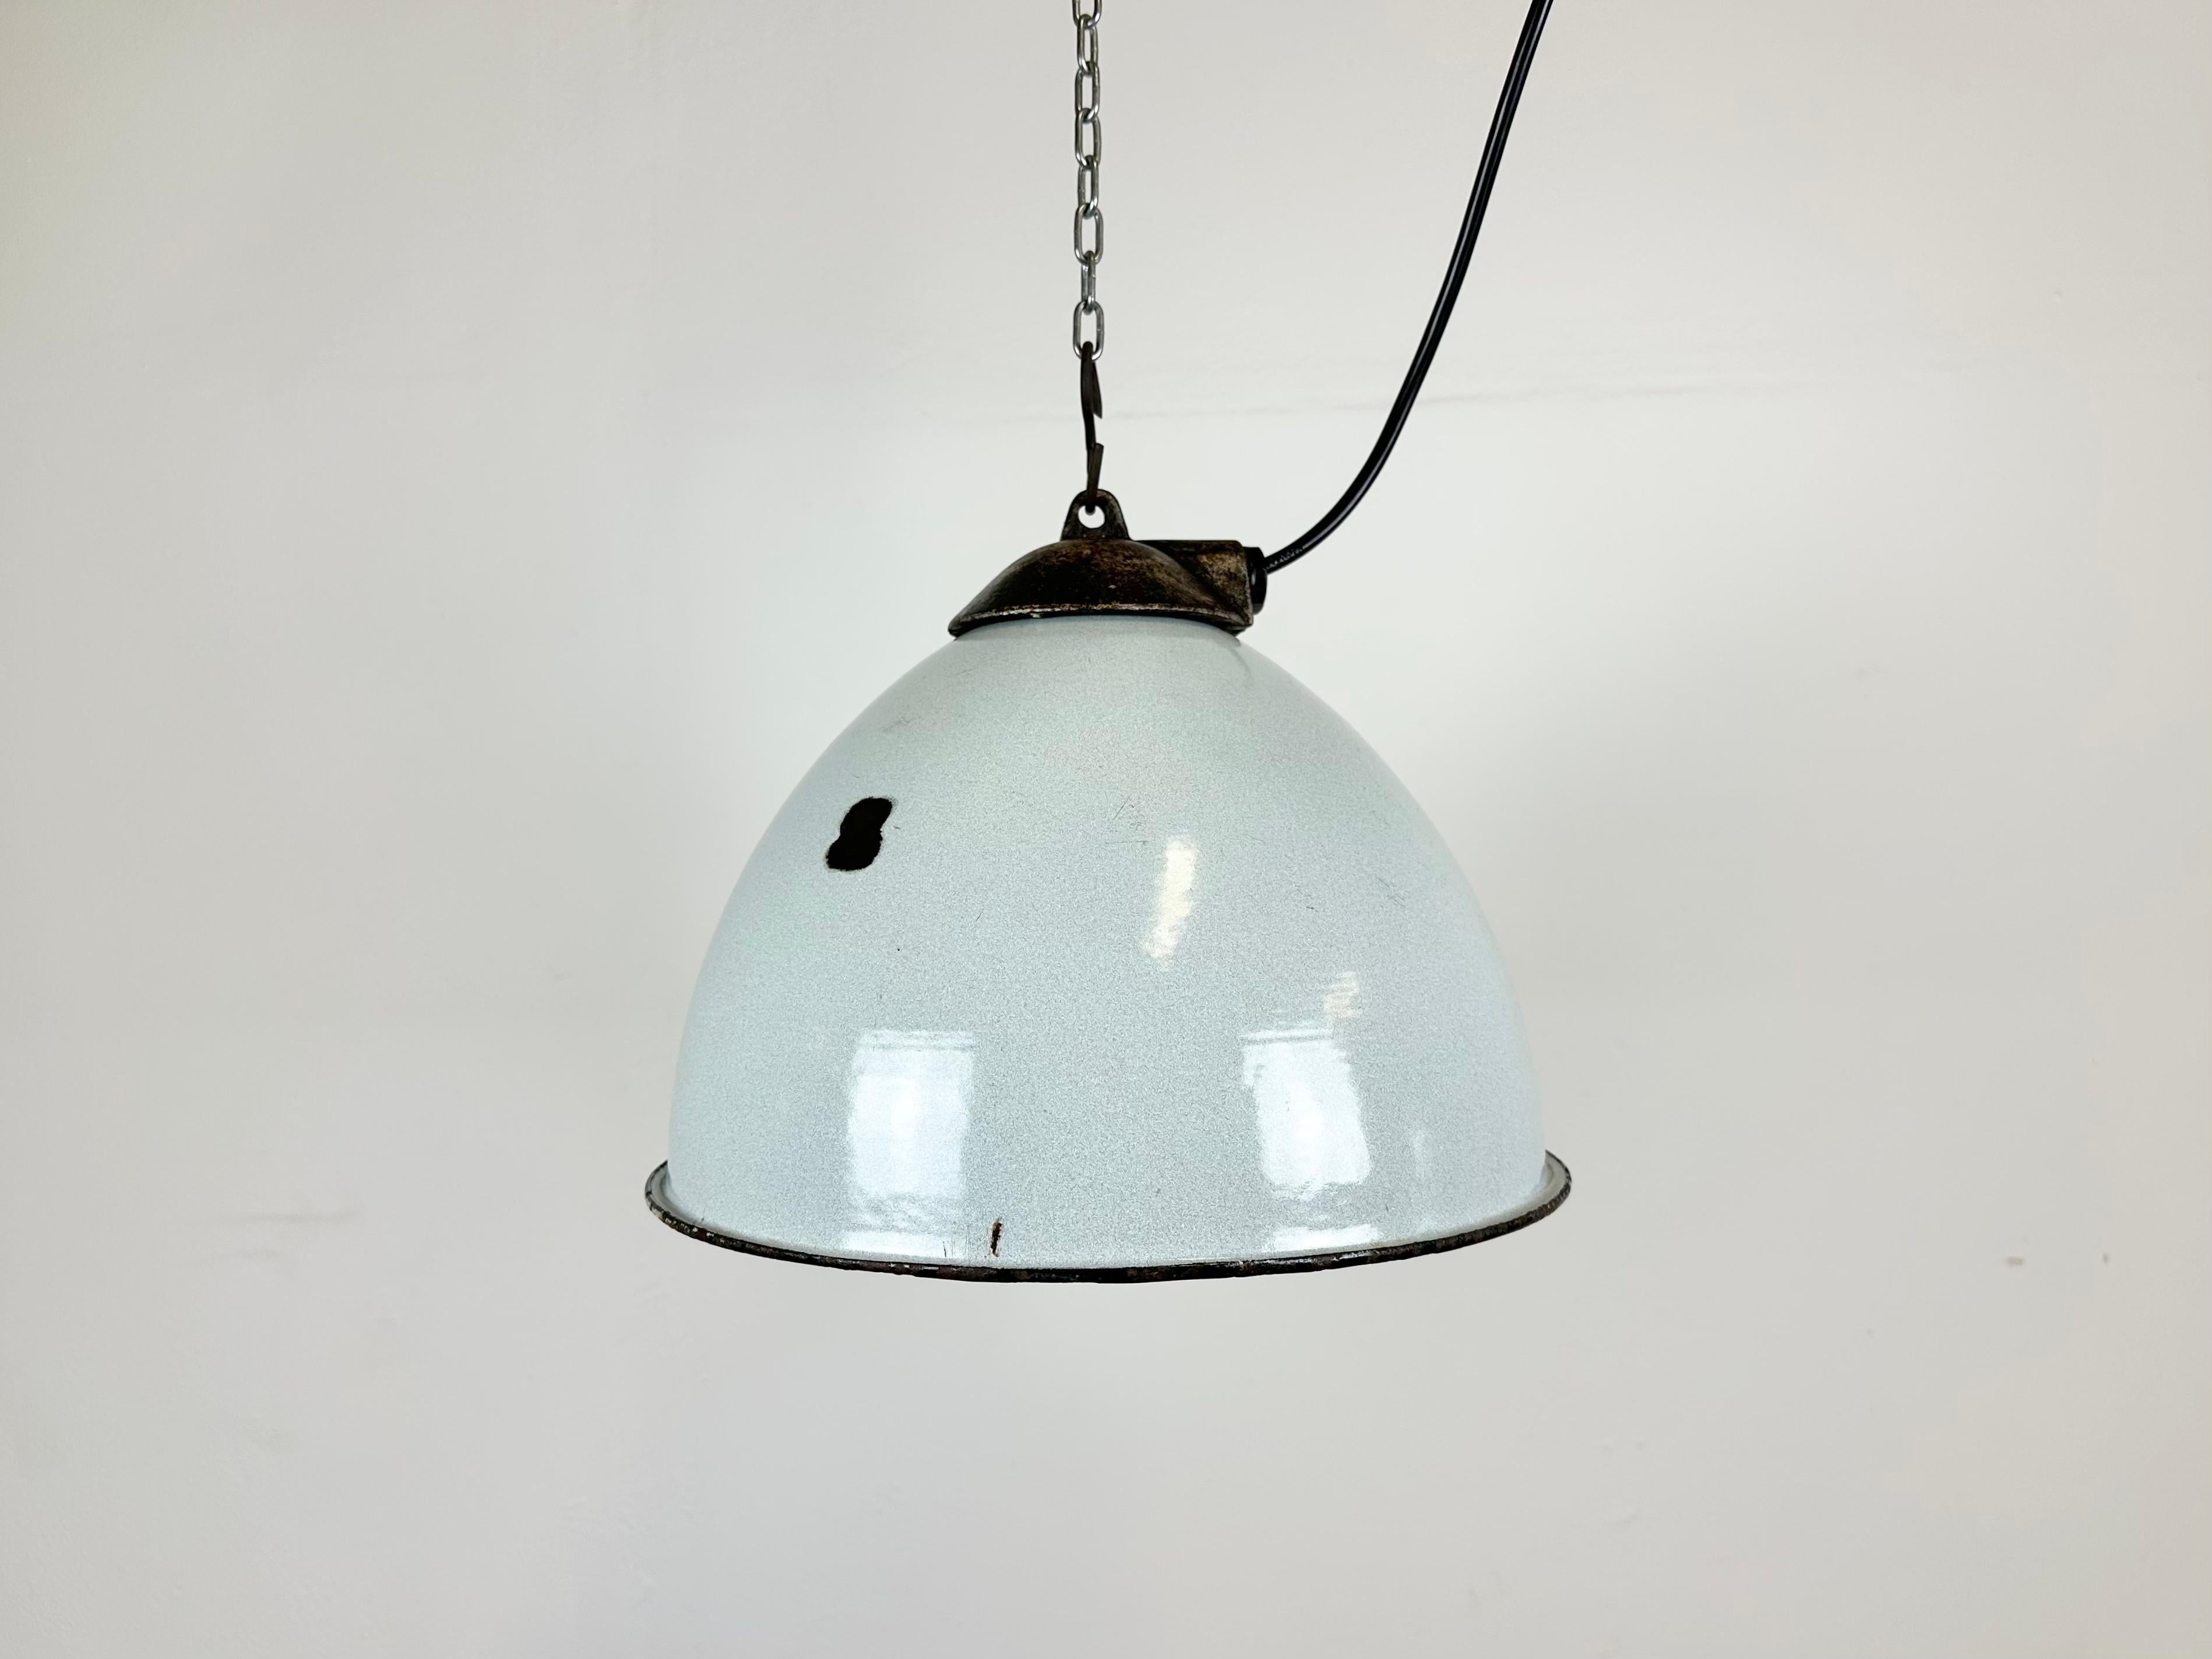 Industrial grey enamel pendant light made by Zaos in Poland during the 1960s. White enamel inside the shade. Cast iron top. The porcelain socket requires E 27/ E 26 light bulbs. New wire. Fully functional. The weight of the lamp is 1,8 kg.